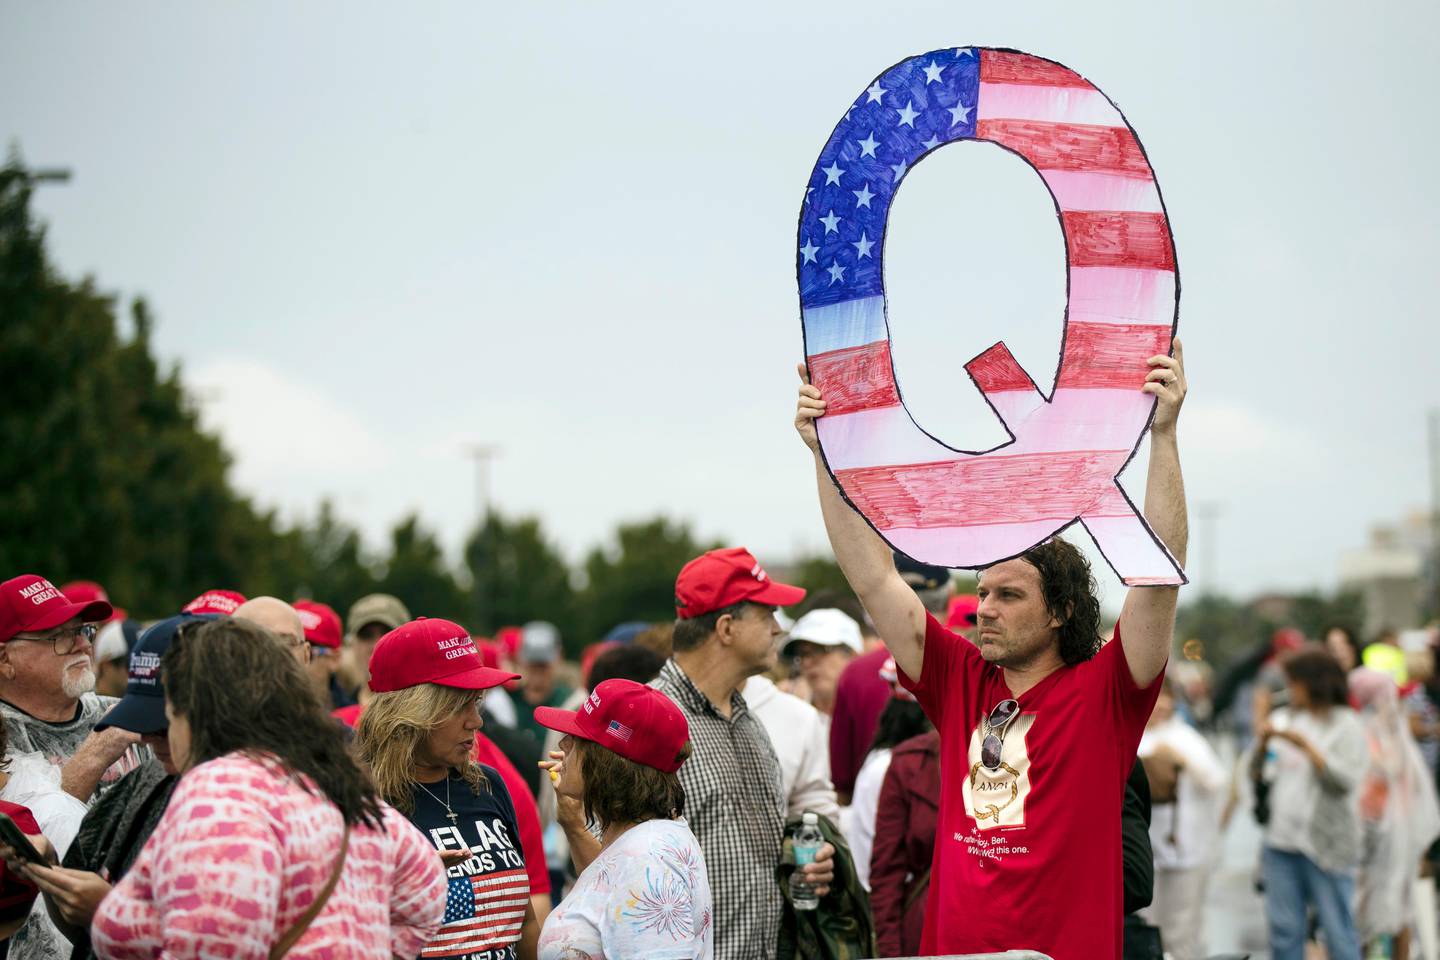 FILE - In this Aug. 2, 2018, file photo, a protesters holds a Q sign waits in line with others to enter a campaign rally with President Donald Trump in Wilkes-Barre, Pa.   Facebook and Twitter promised to stop encouraging the growth of the baseless conspiracy theory QAnon, which fashions President Donald Trump as a secret warrior against a supposed child-trafficking ring run by celebrities and government officials. But the social media companies havent succeeded at even that limited goal, a review by The Associated Press found.  (AP Photo/Matt Rourke, File)